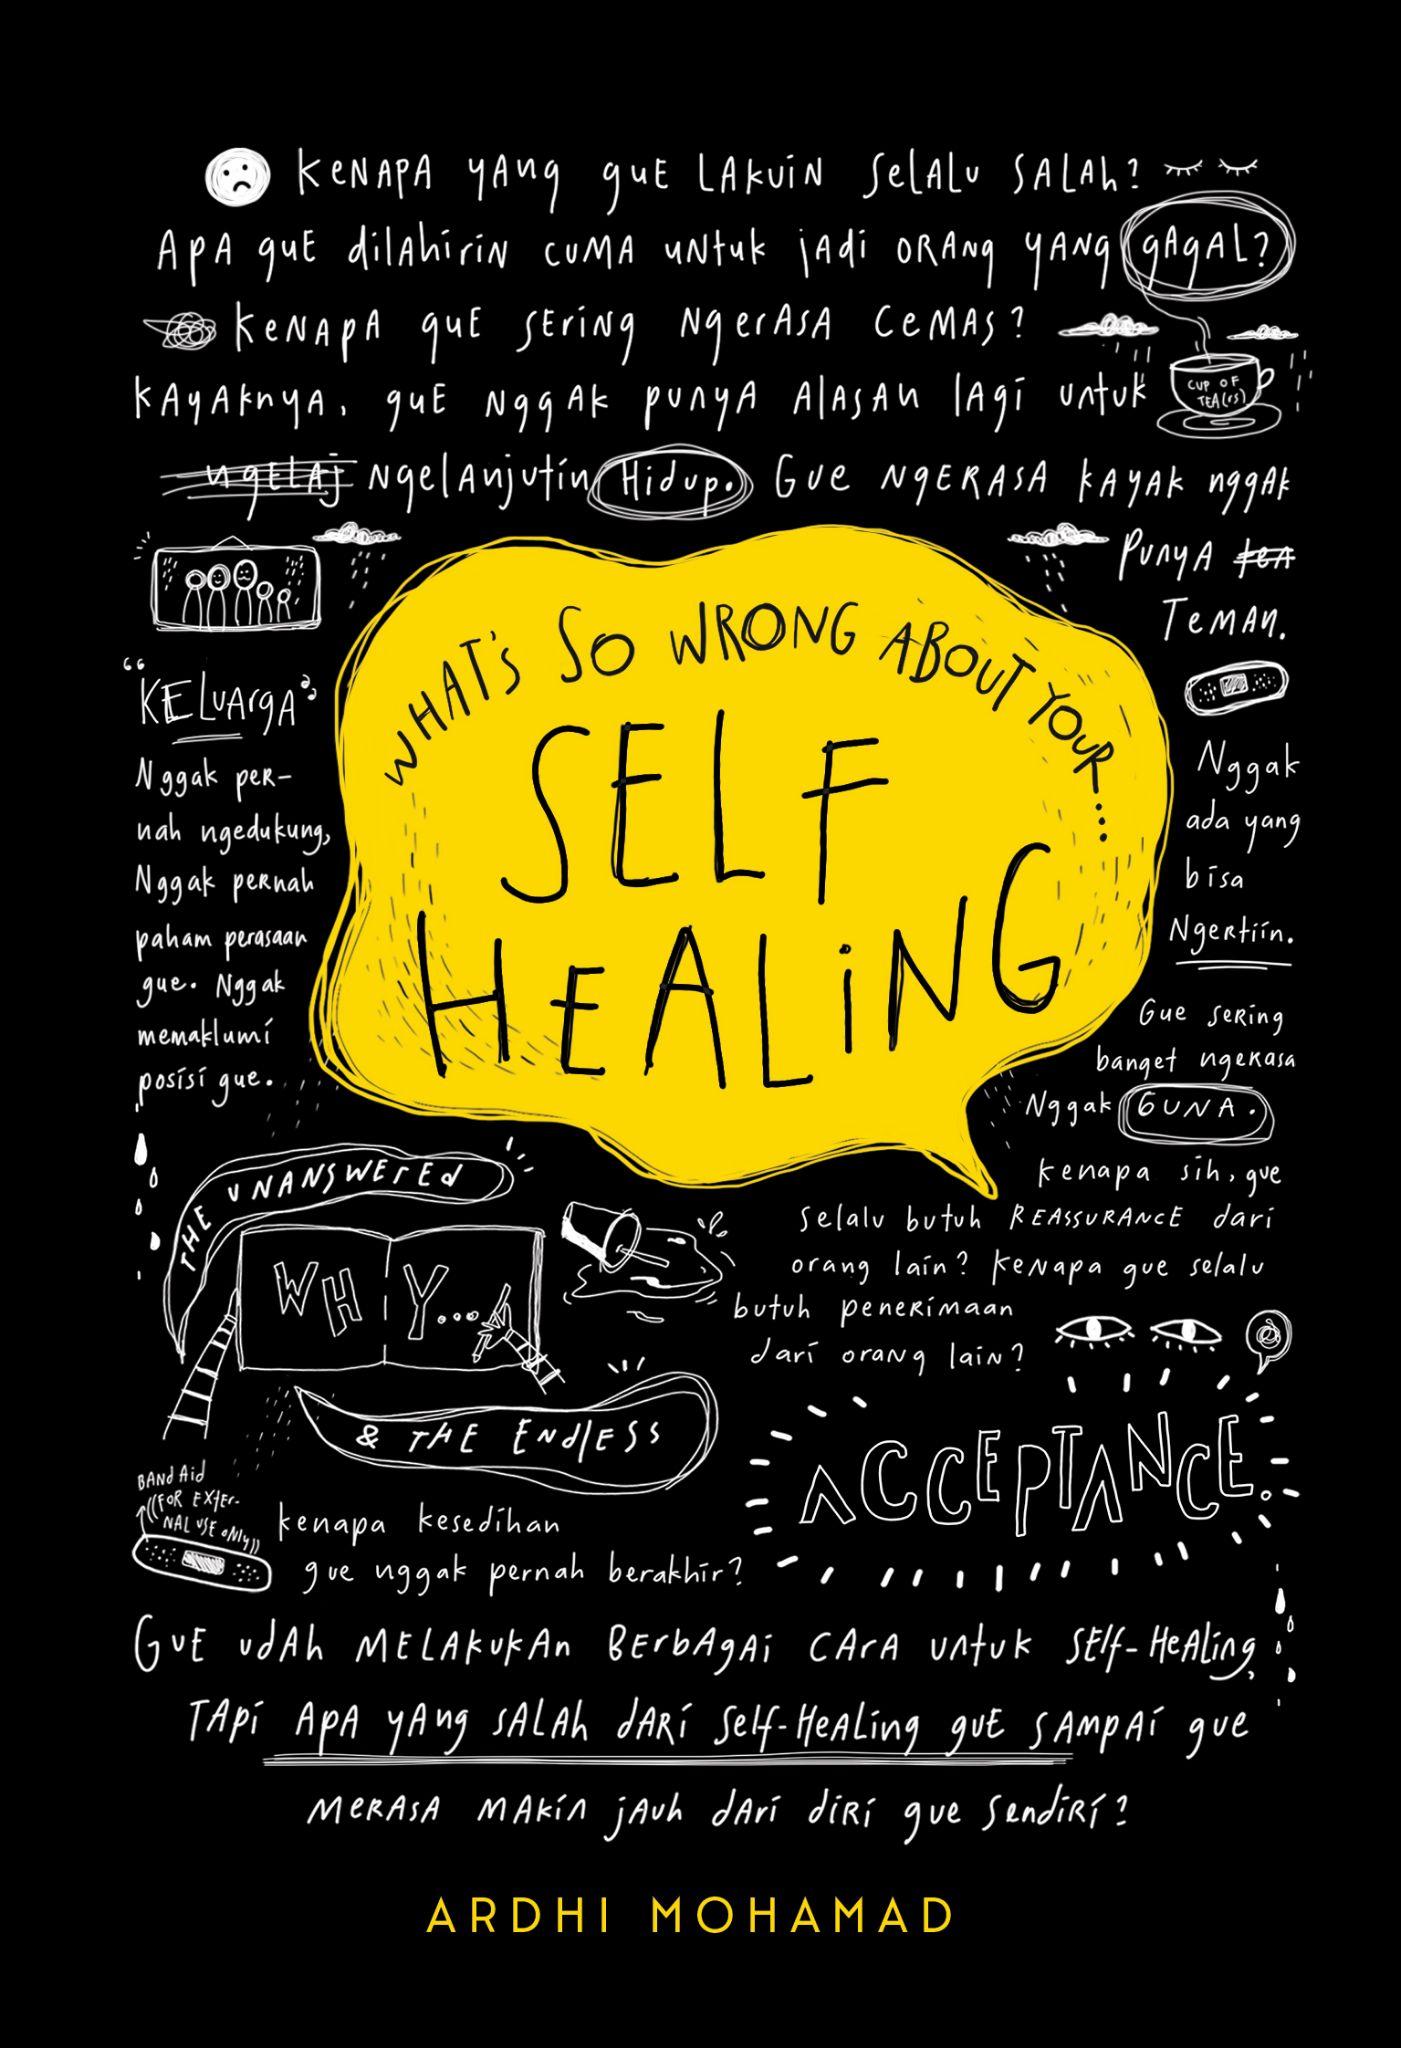 What's so wrong about your self healing